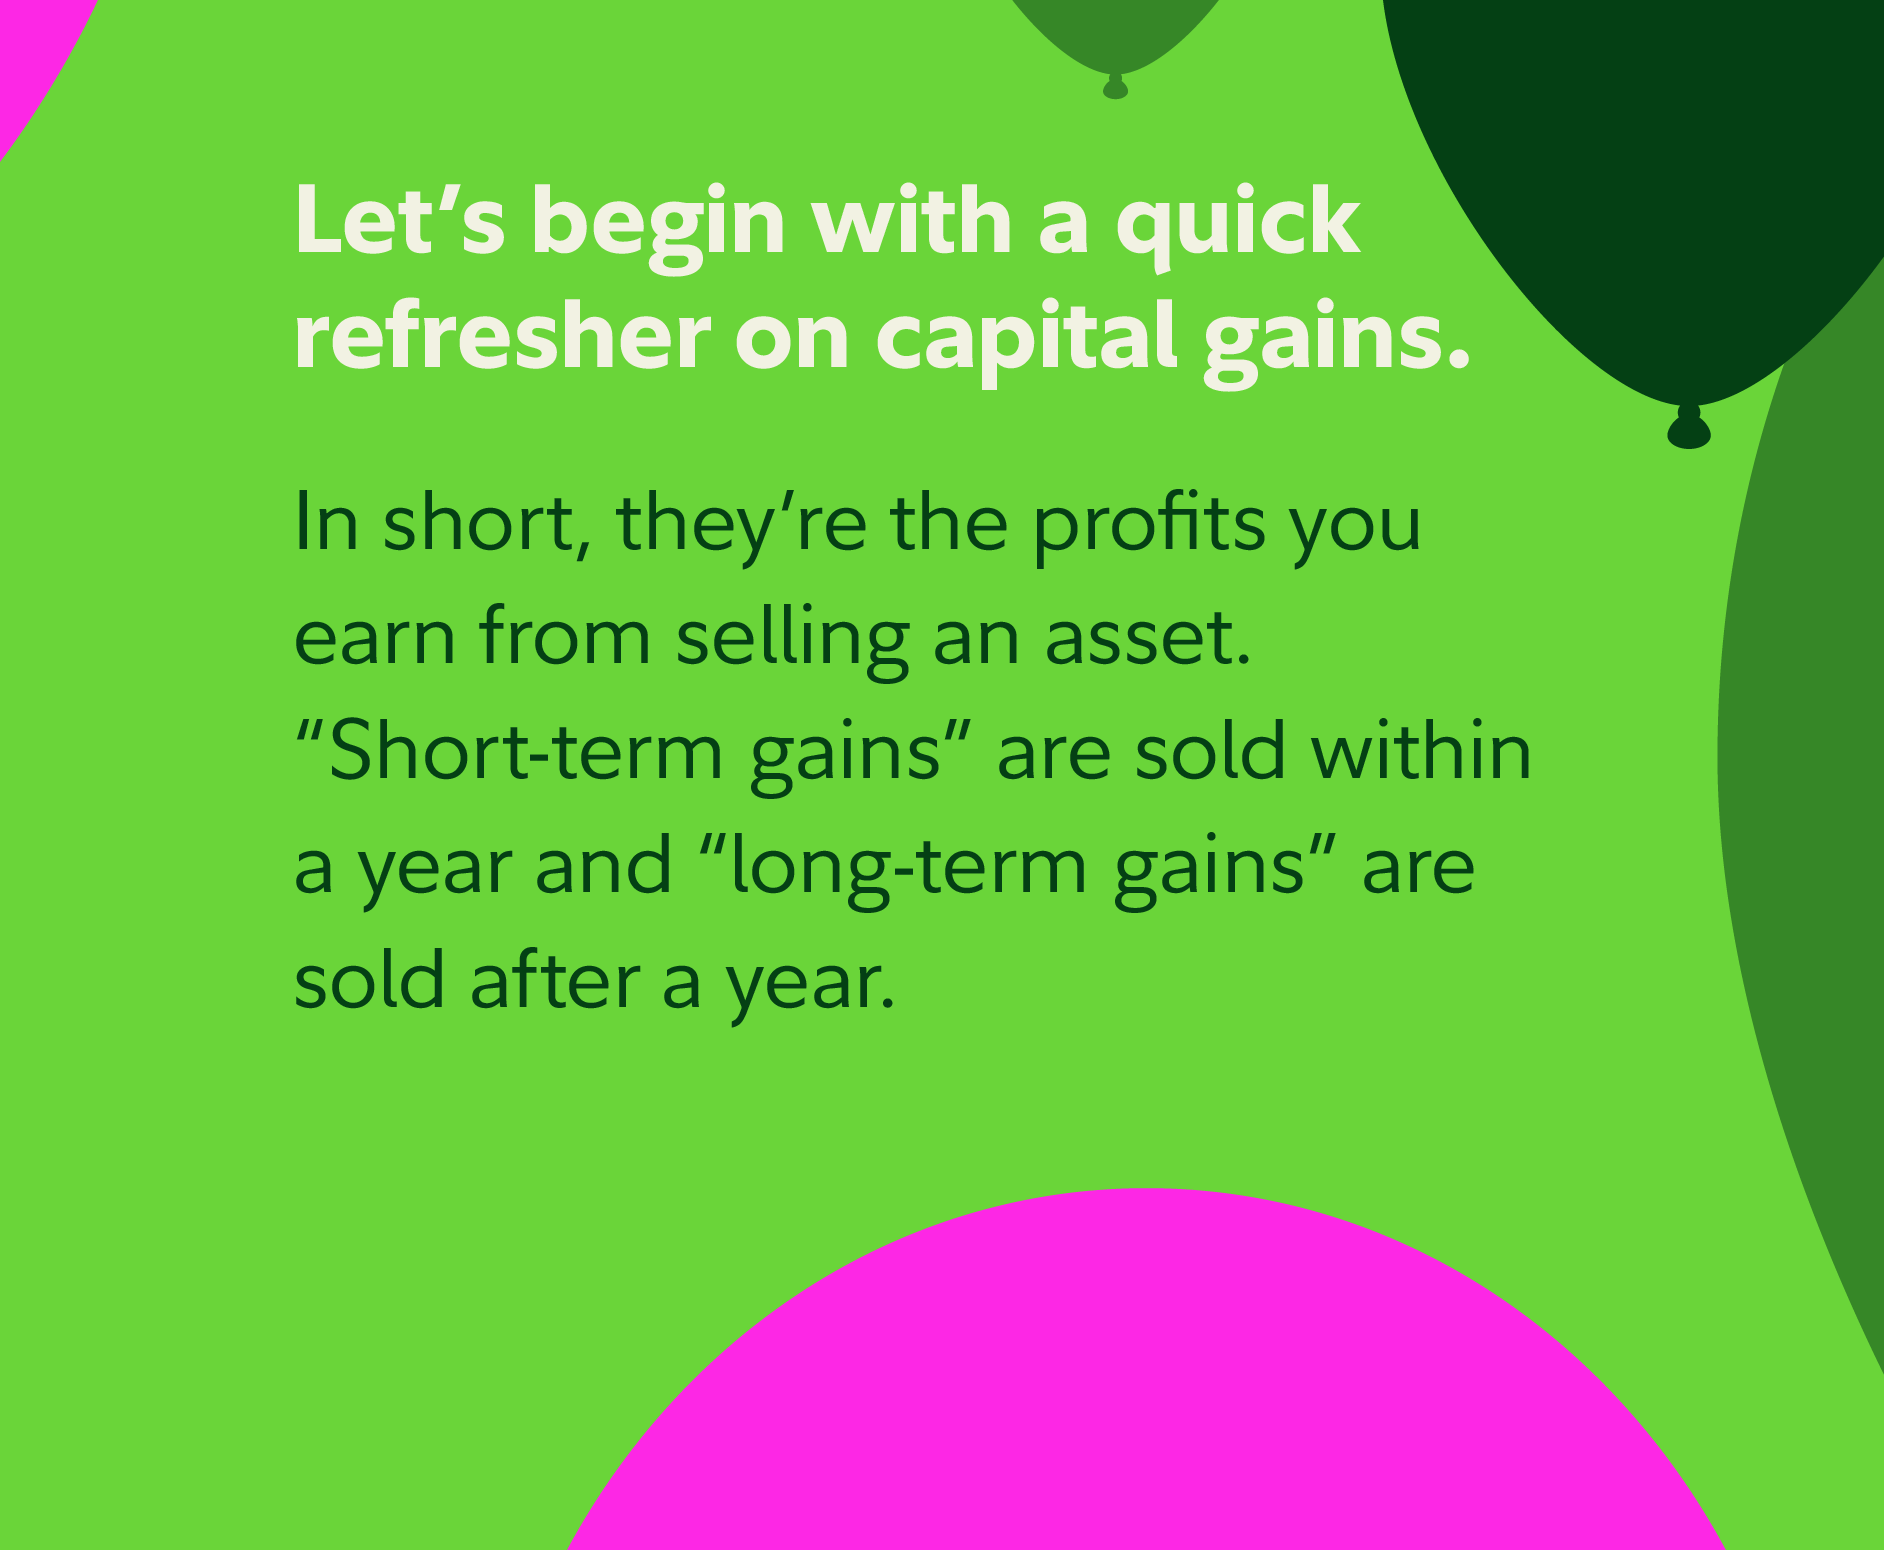 Let's begin with a quick refresher on capital gains. In short, they're the profits you earn from selling an asset. Short-term gains are sold within a year and long-term gains are sold after a year.